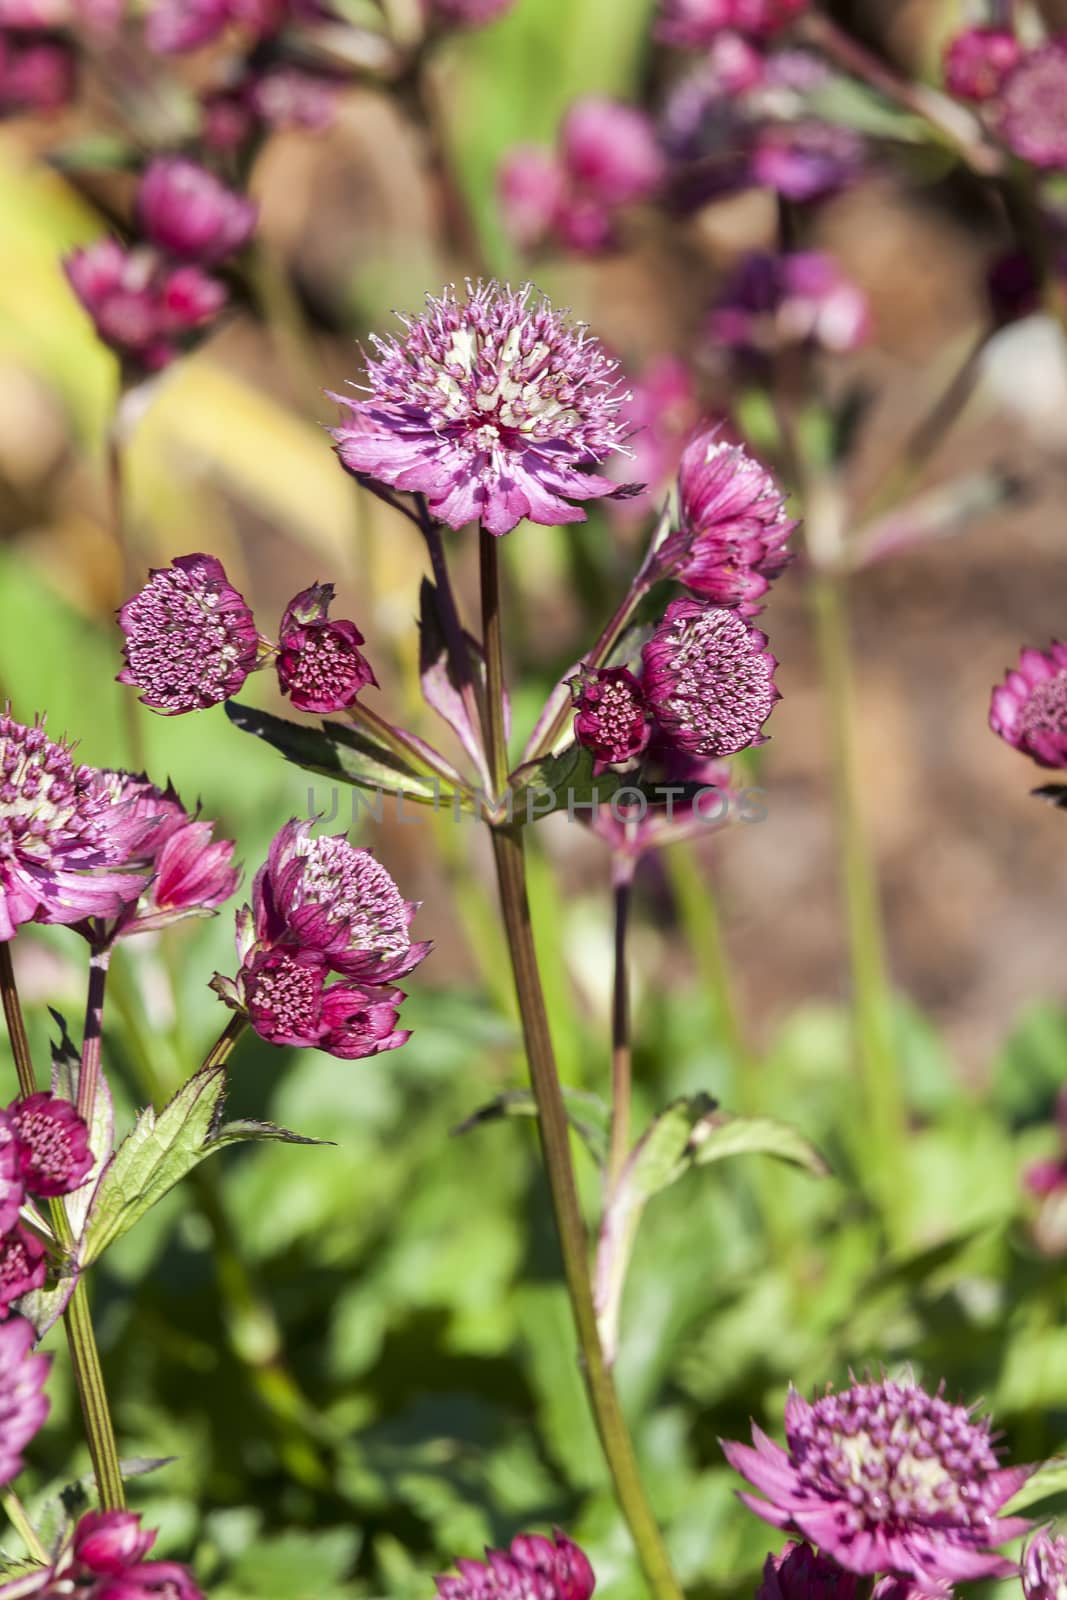 Astrantia major 'Abbey Road' an herbaceous perennial springtime summer flower plant commonly known as great masterwort